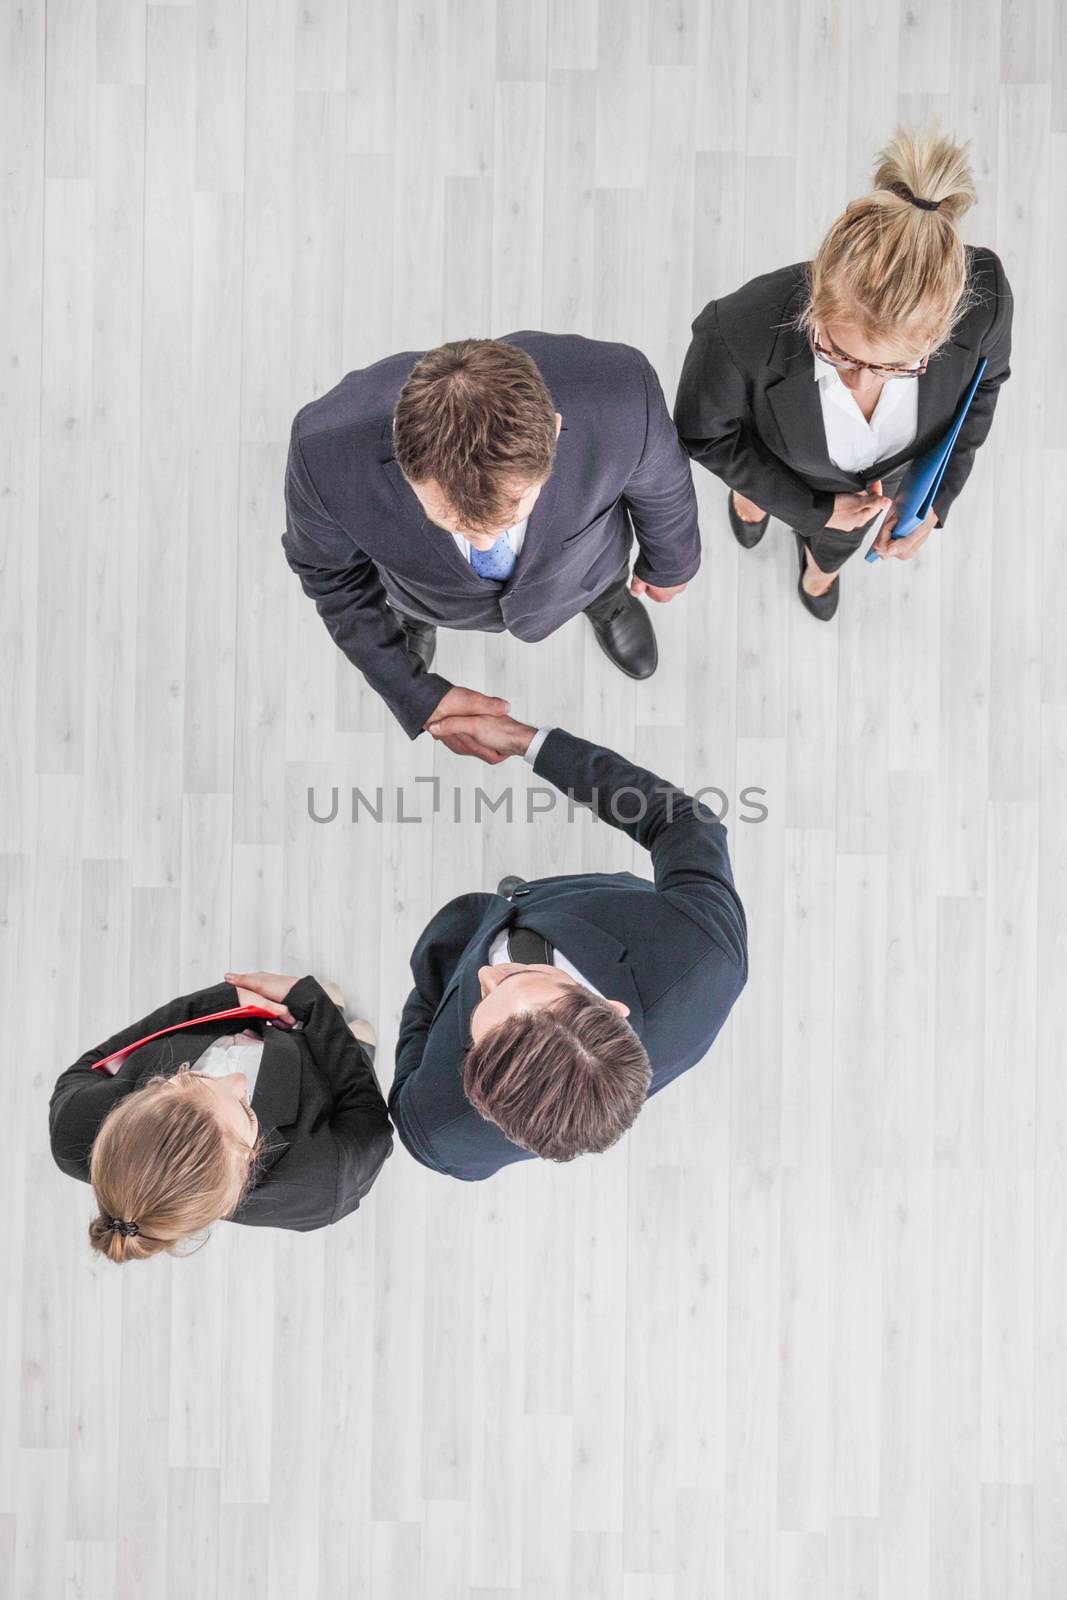 Business people shaking hands, finishing up a meeting, top view